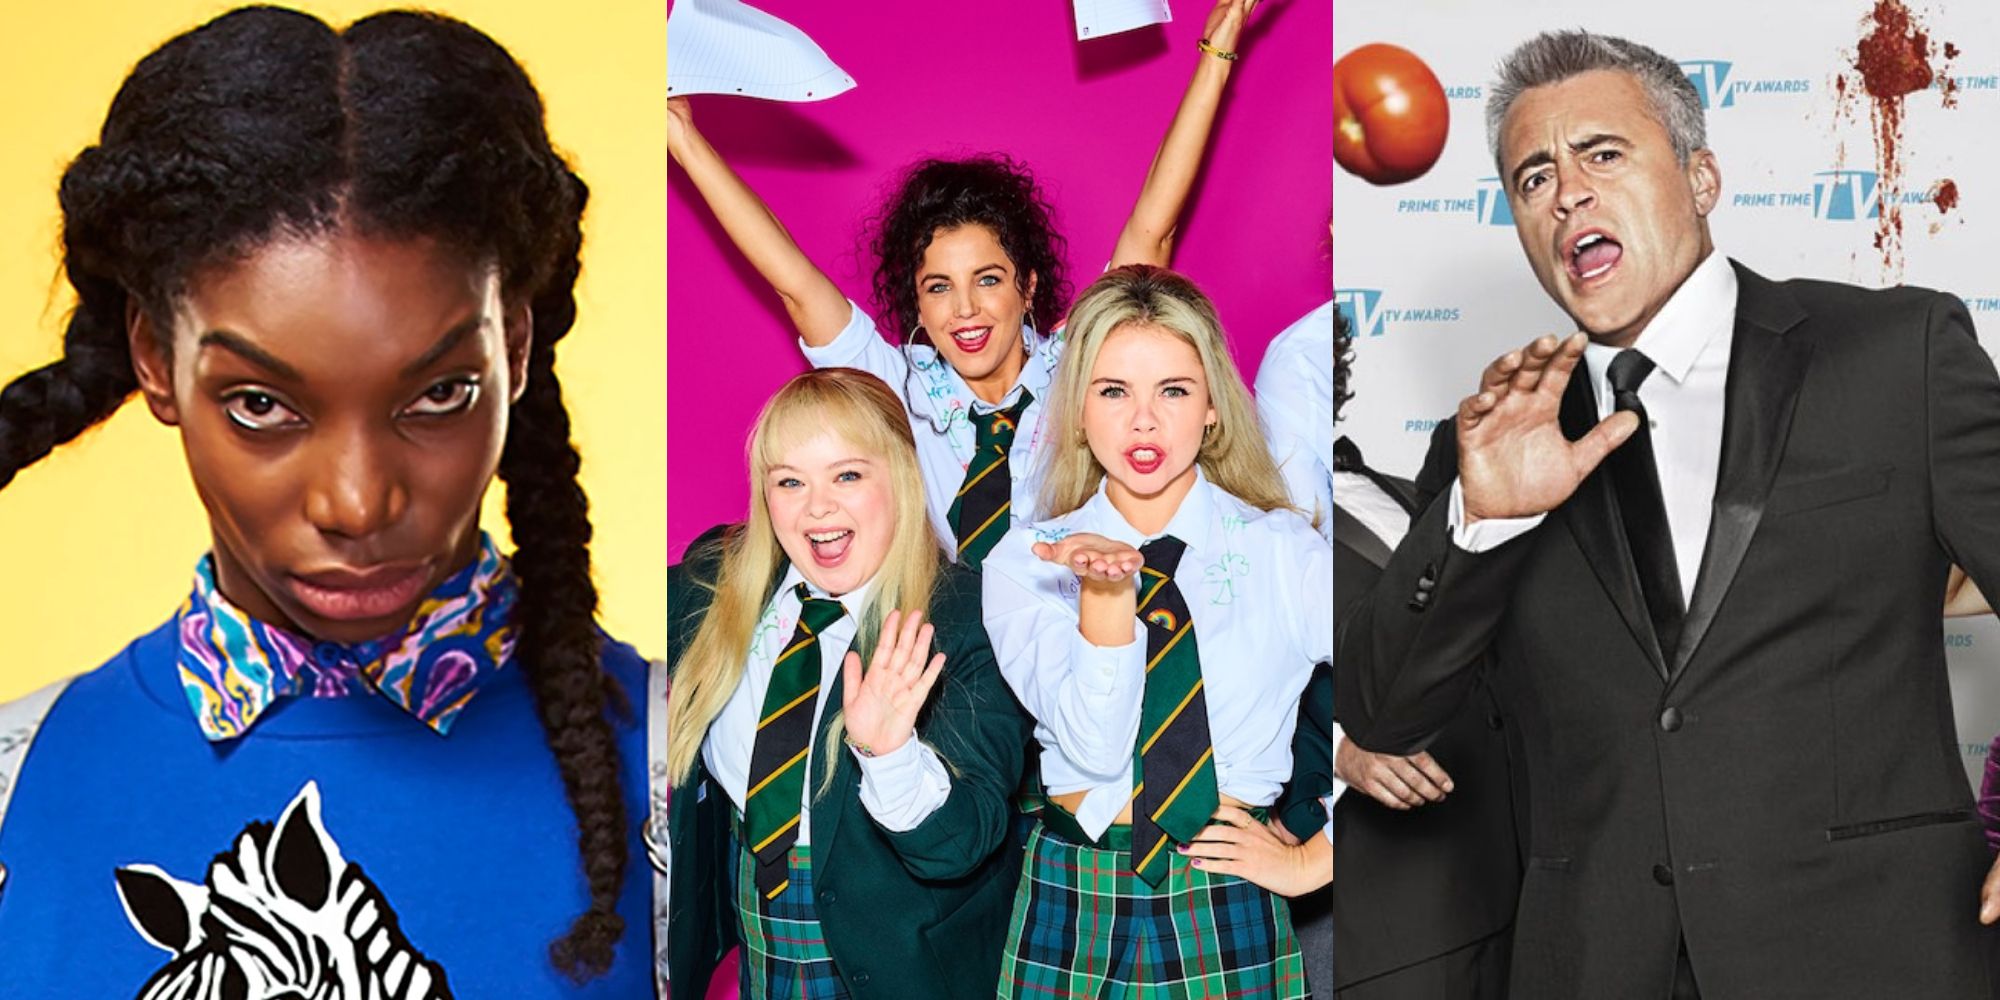 Split image showing characters from Chewing Gum, Derry Girls, and Episodes